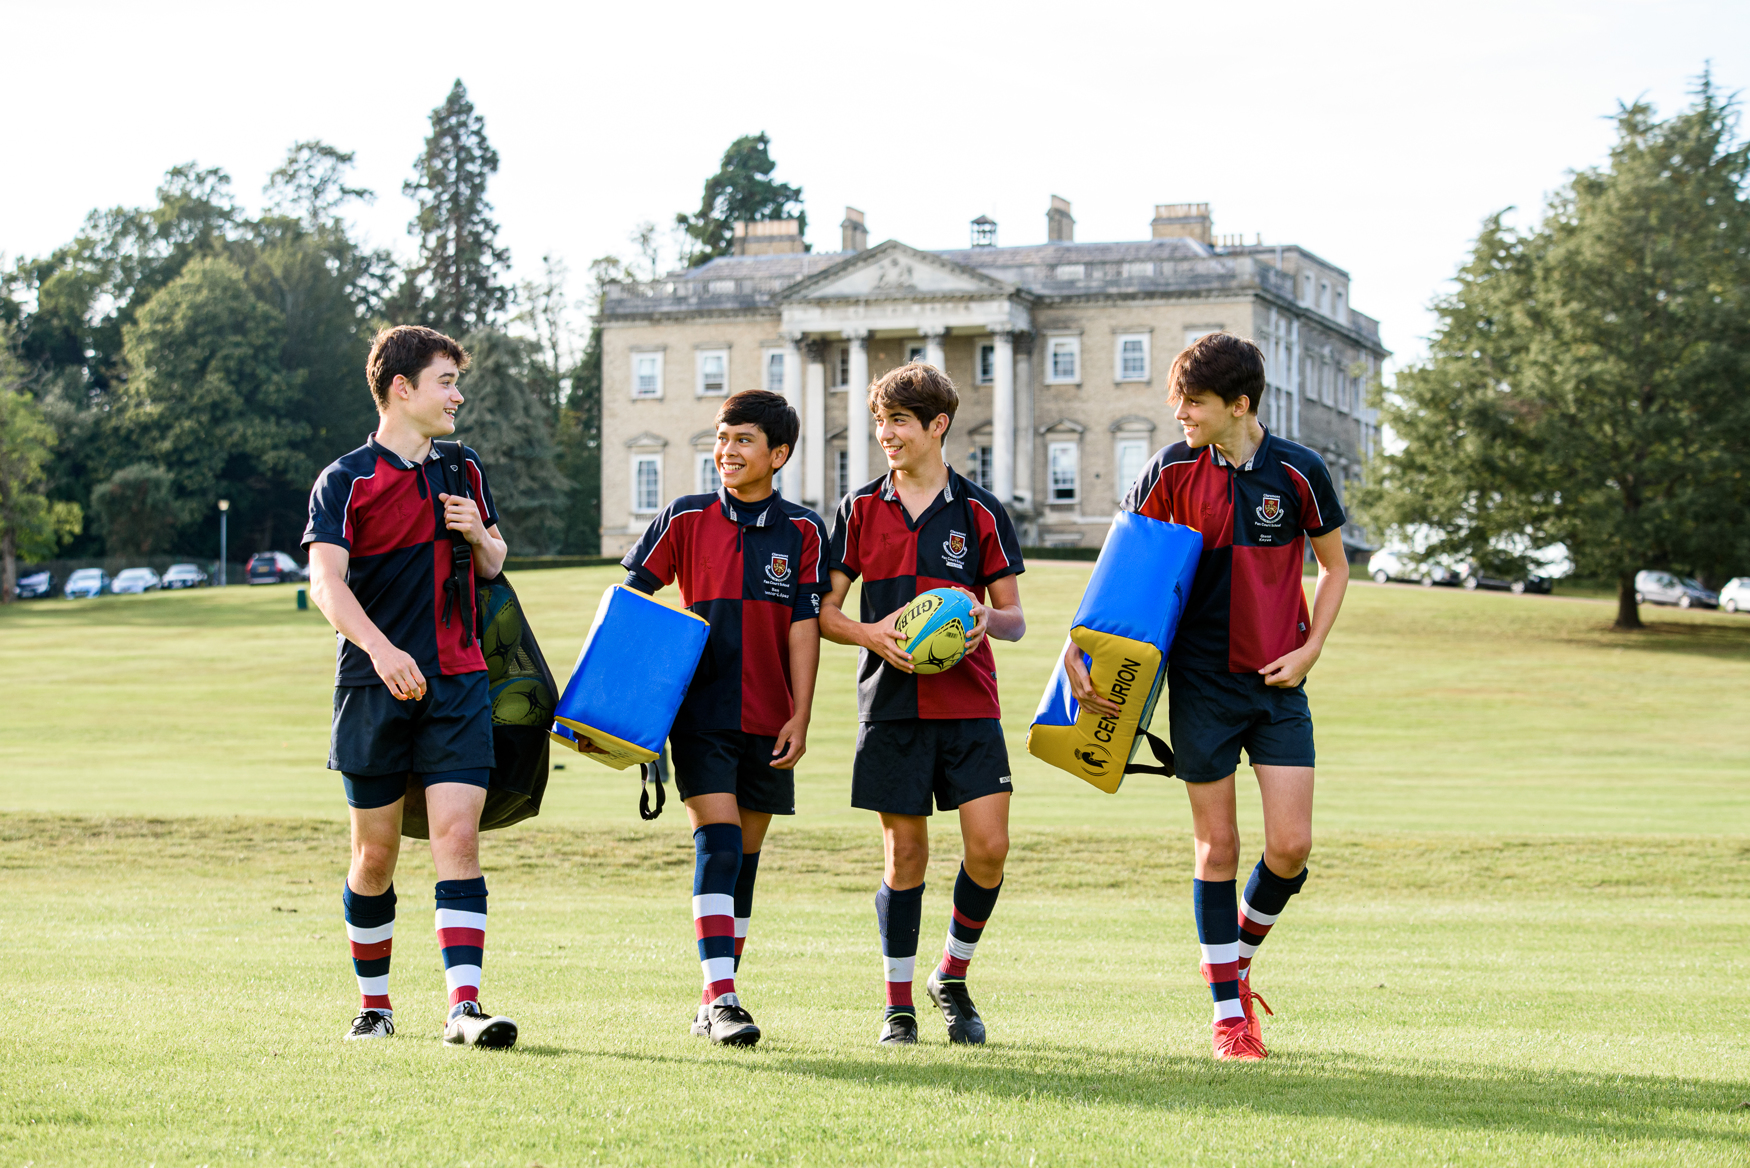 Rugby with mansion in background